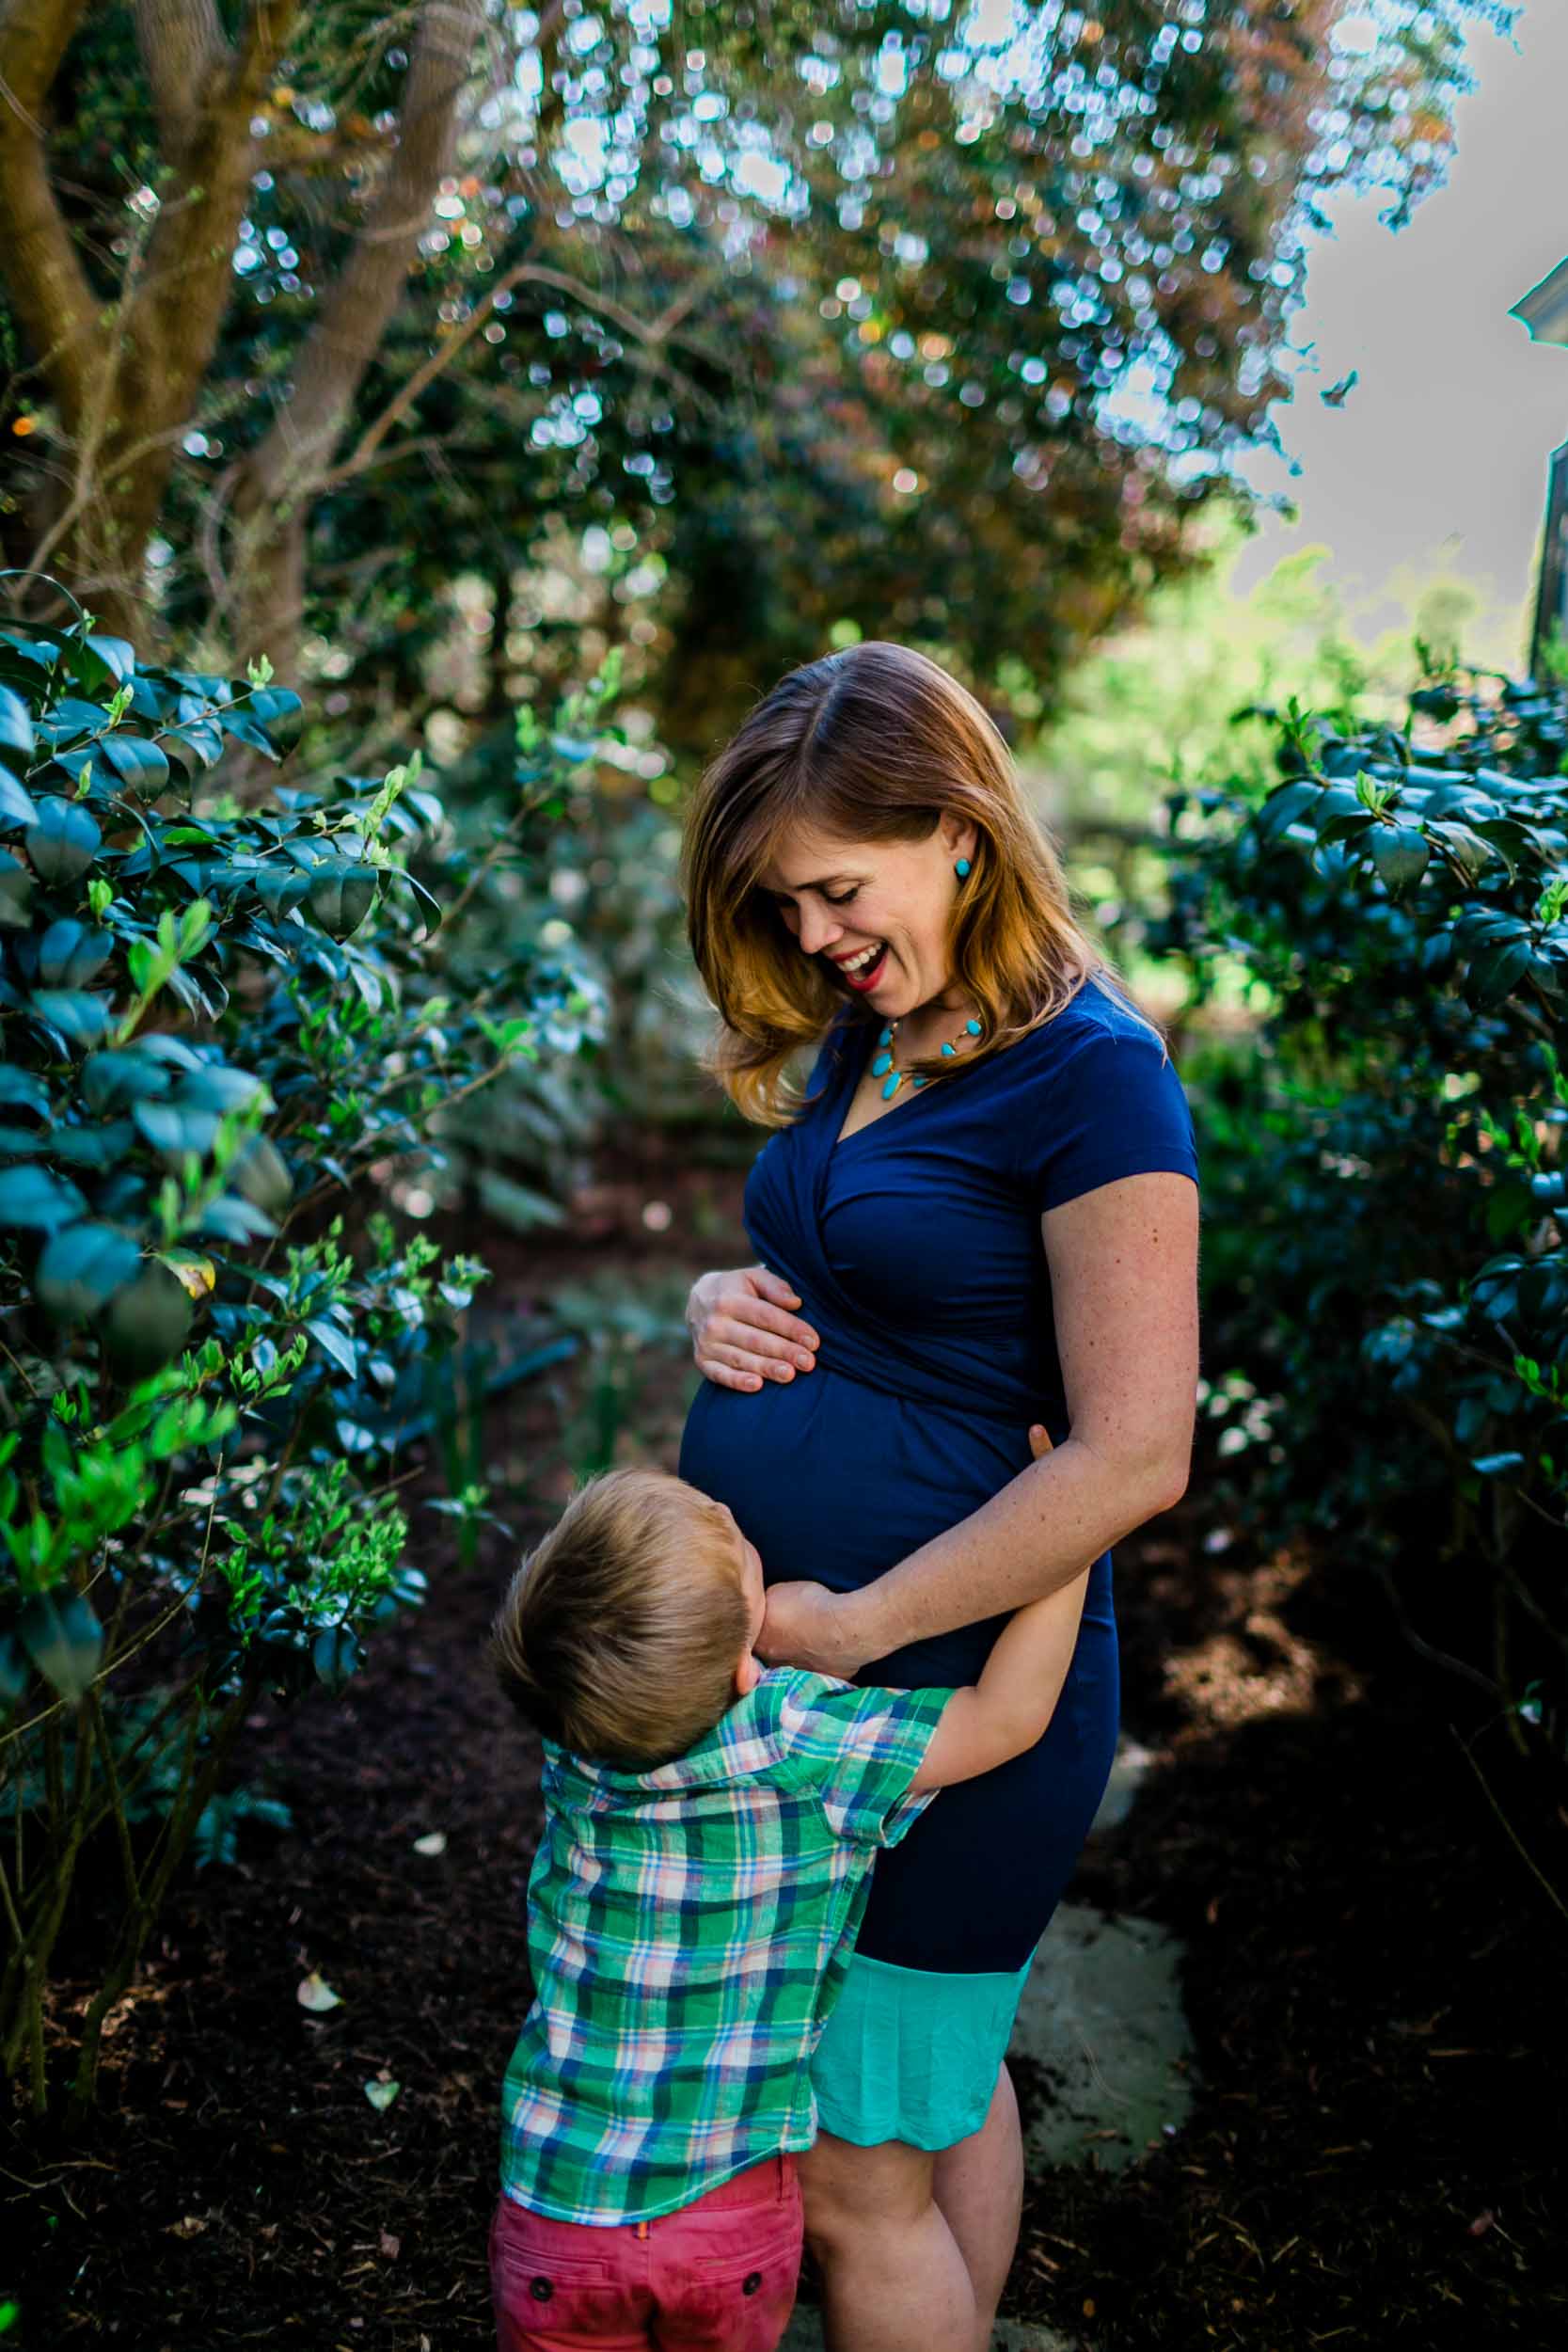 Durham Maternity Photographer | By G. Lin Photography | Son hugging mother's baby belly